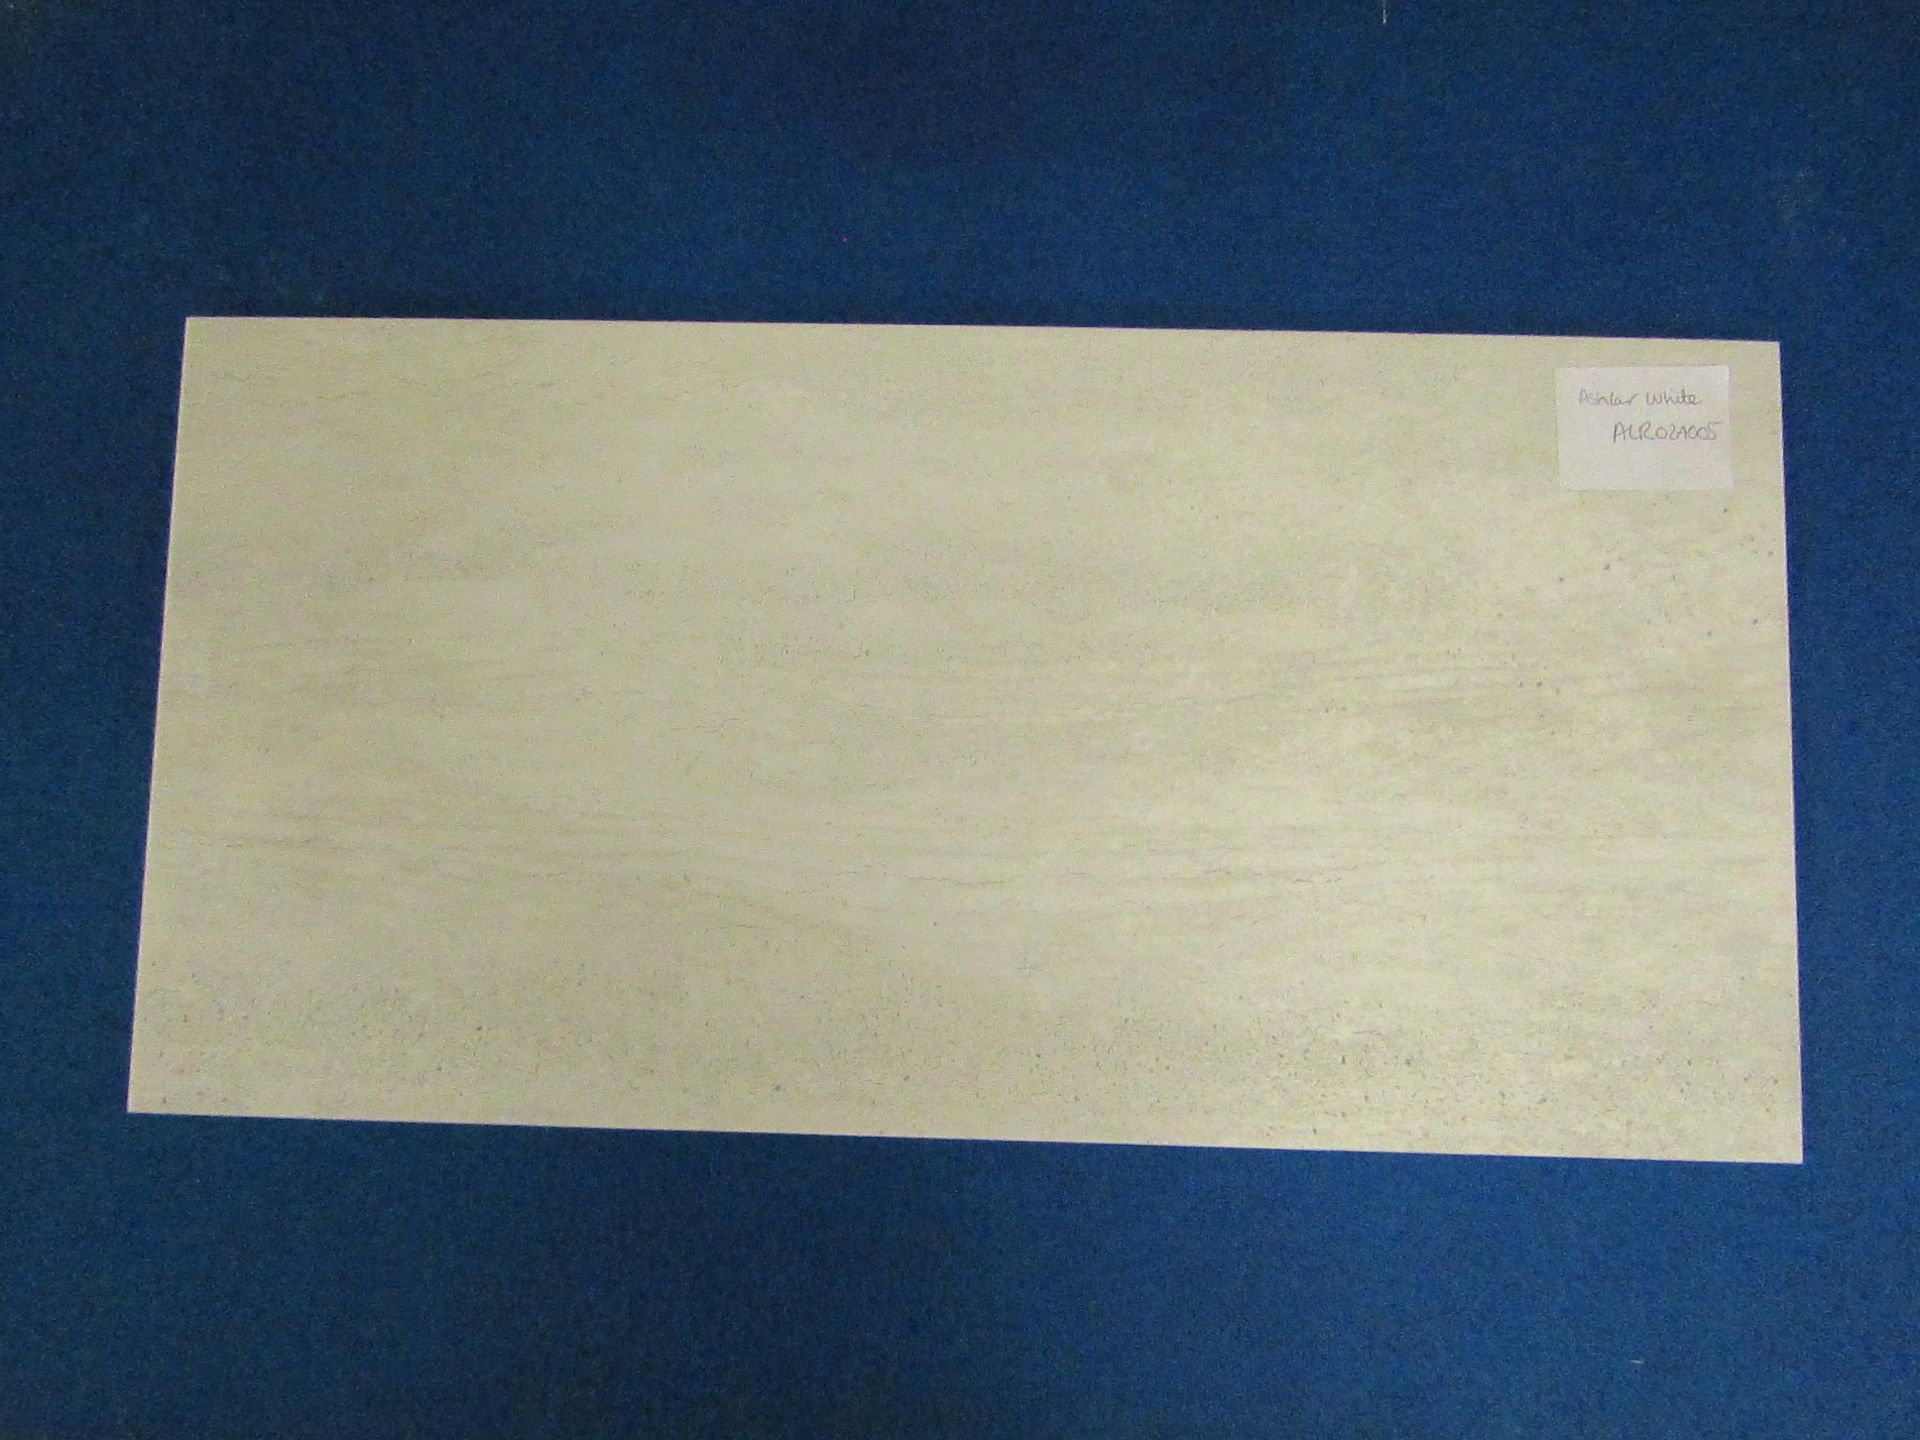 Pallet of 40x Packs of 5 Aslar White 300x600 wall and Floor Tiles By Johnsons, New, the pallet